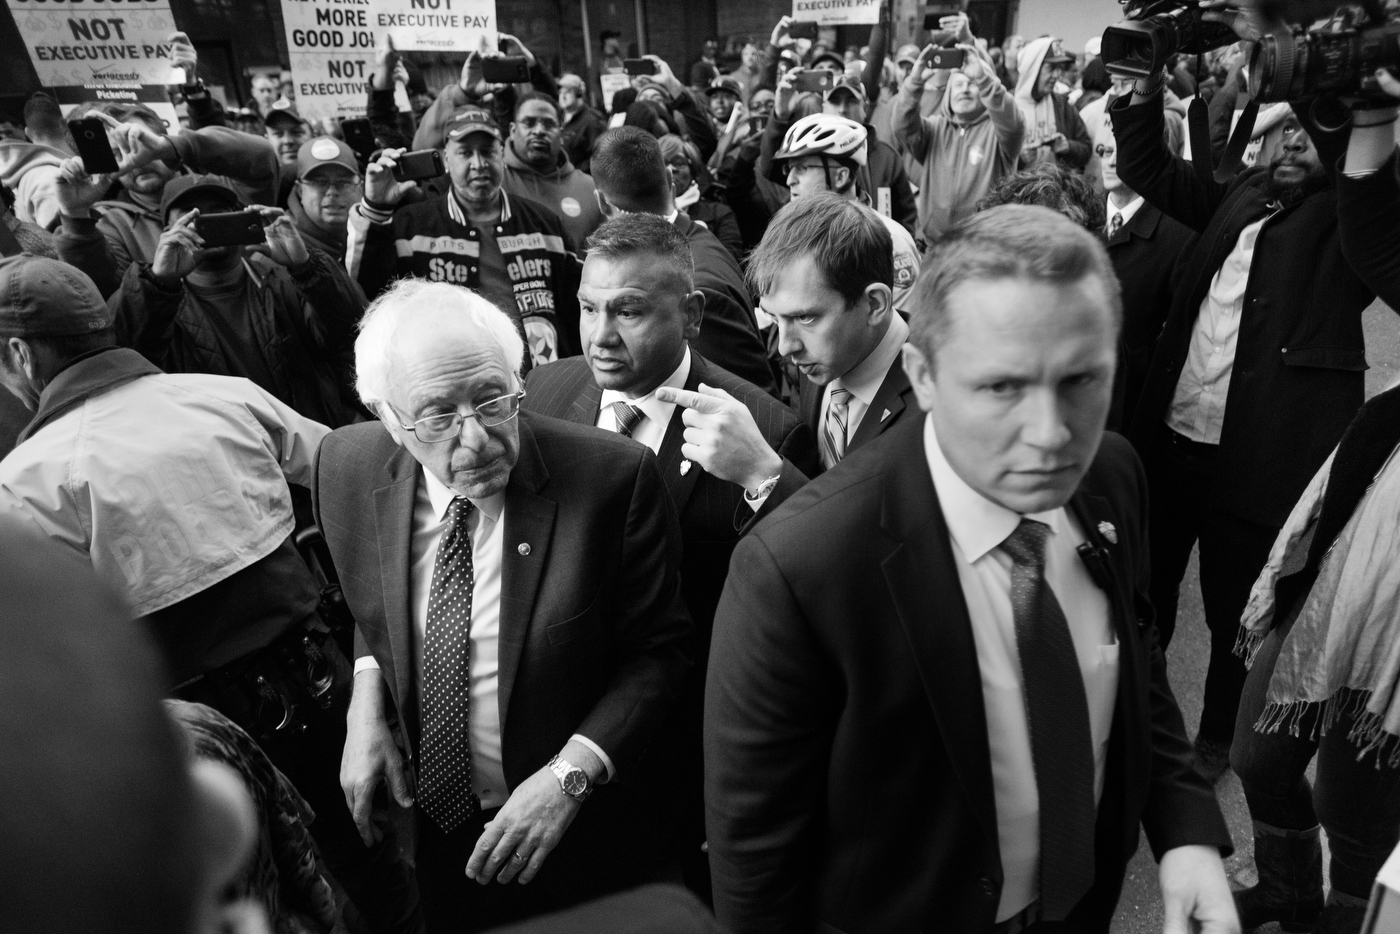  Shannon Jackson, aide to Democratic presidential candidate Bernie Sanders, speaks to Sanders and the lead Secret Service agent as they head through a crowd to speak to a Communication Workers of America protest in Philadelphia, Pennsylvania on April